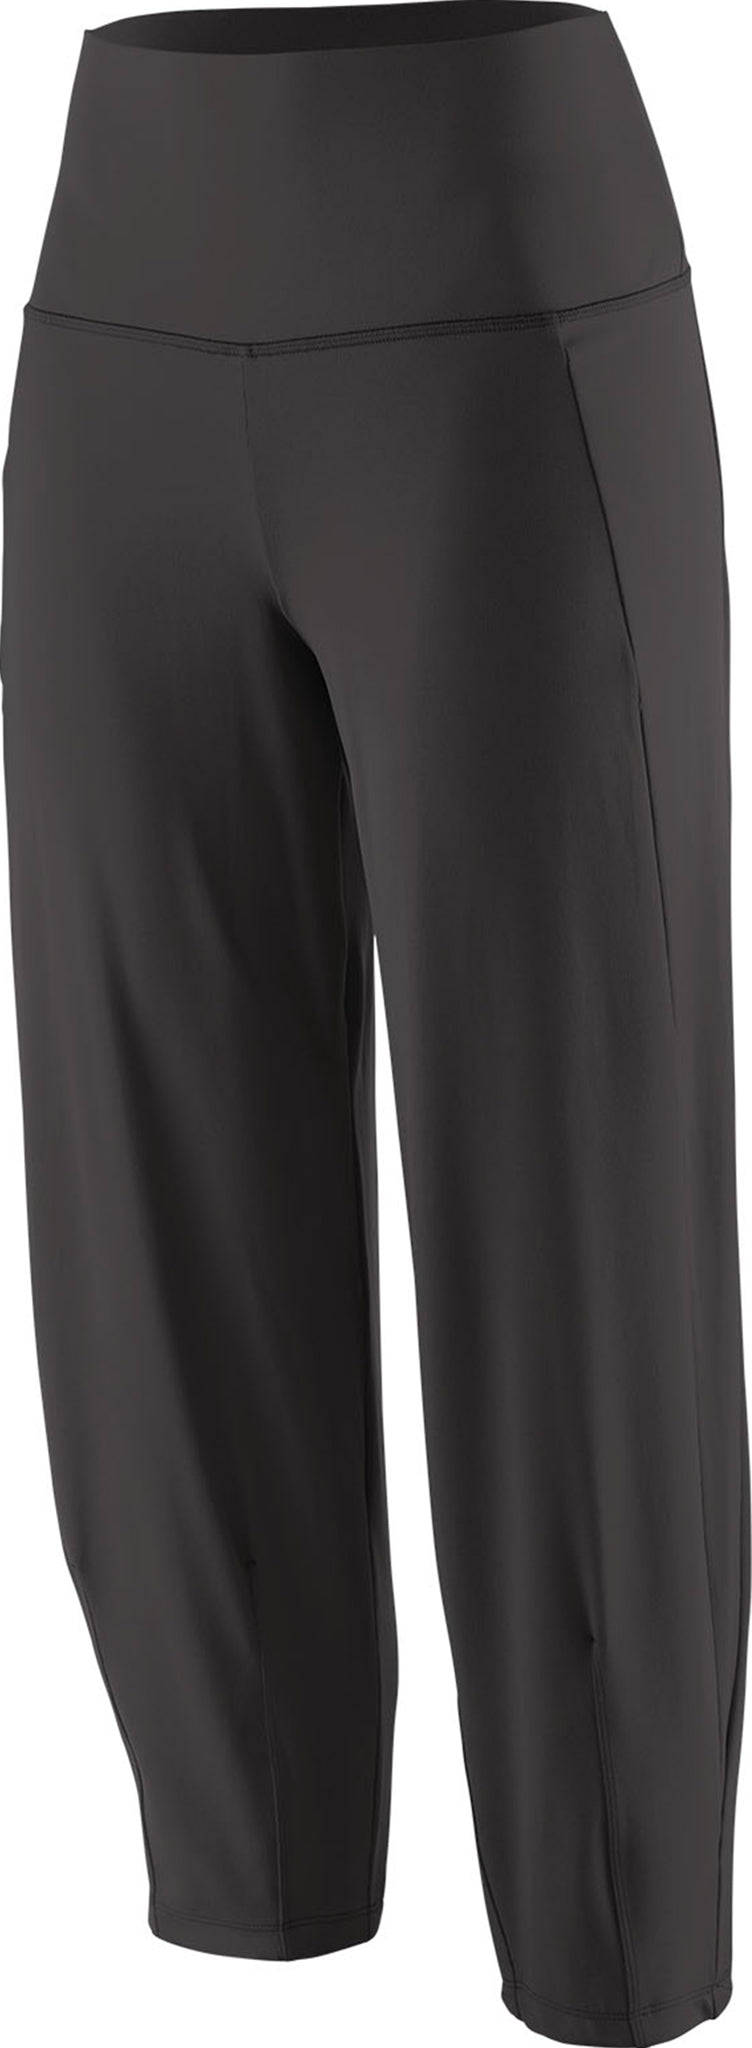 Patagonia Maipo Rock Crops Knit Pants - Women's | Altitude Sports